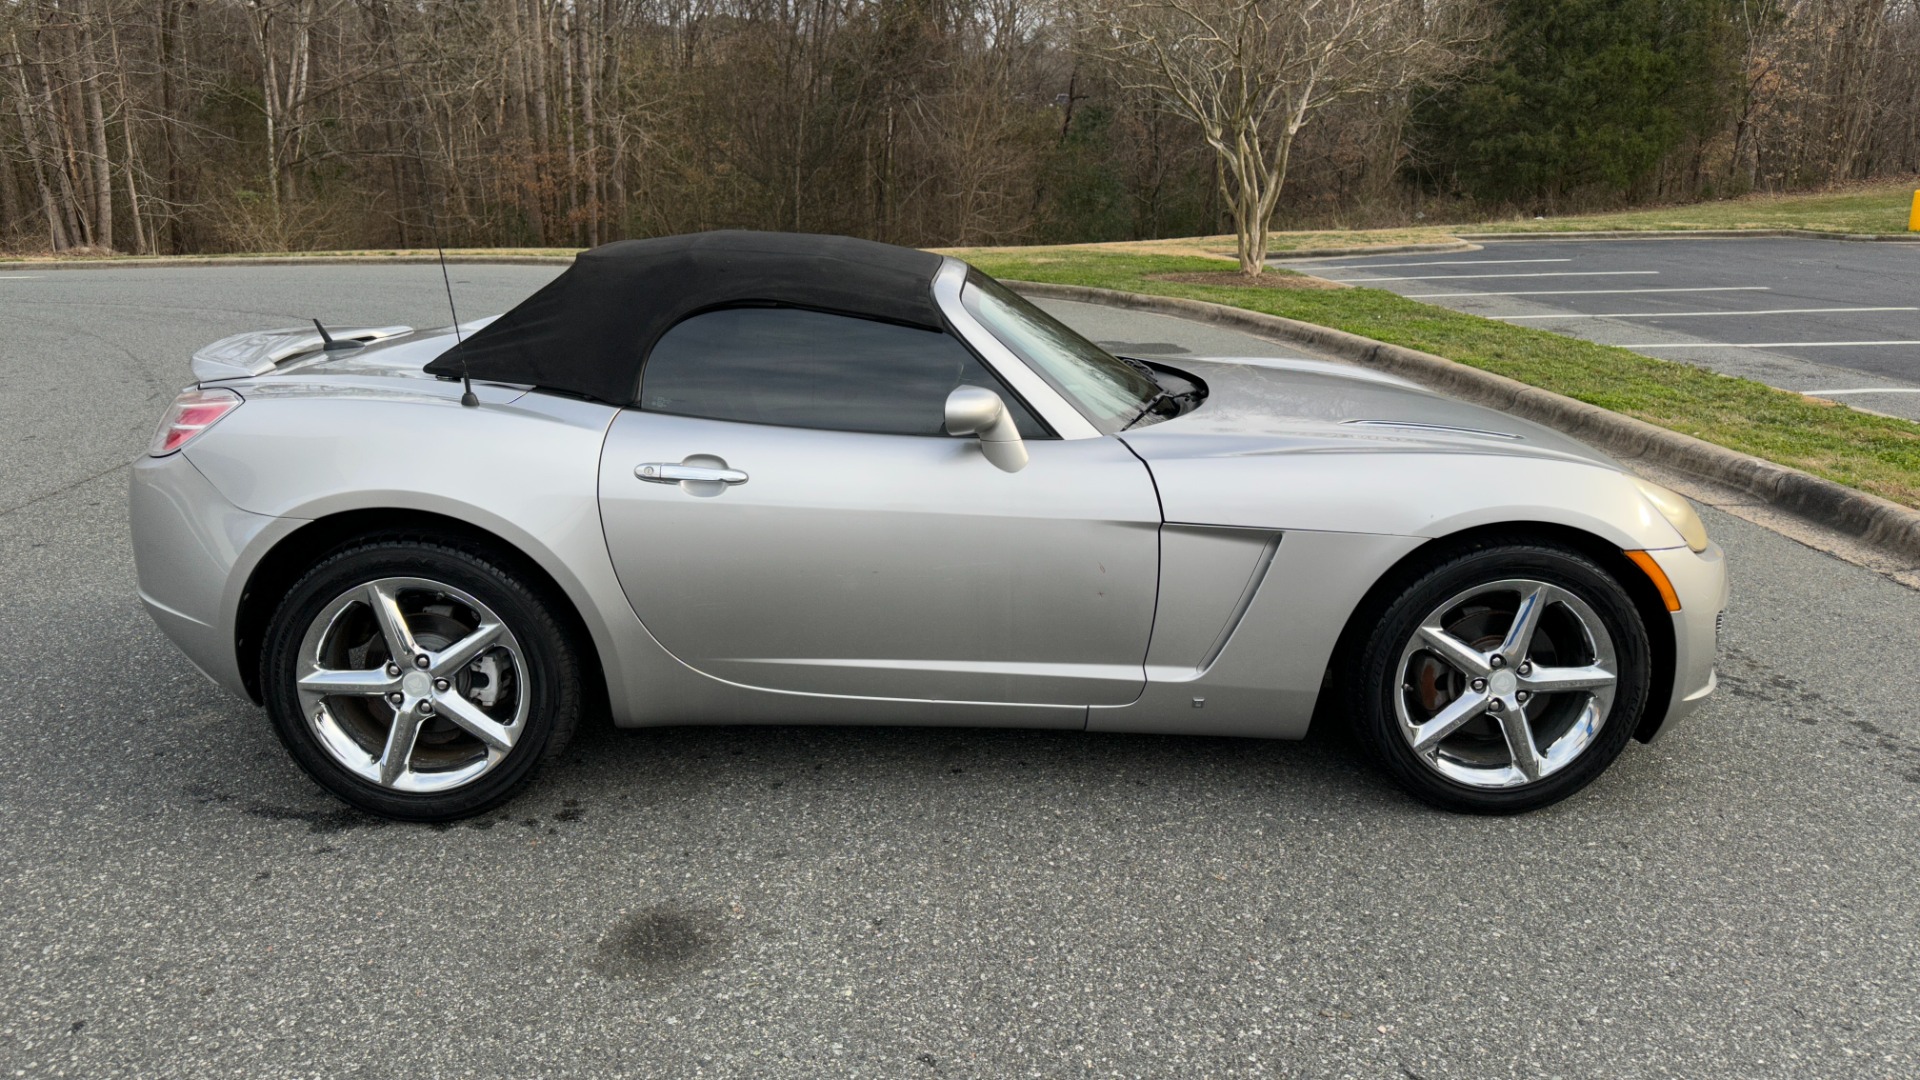 Used 2008 Saturn Sky CONVERTIBLE / MONSOON AUDIO / AUTOMATIC / PREMIUM TRIM / SPOILER for sale Sold at Formula Imports in Charlotte NC 28227 12